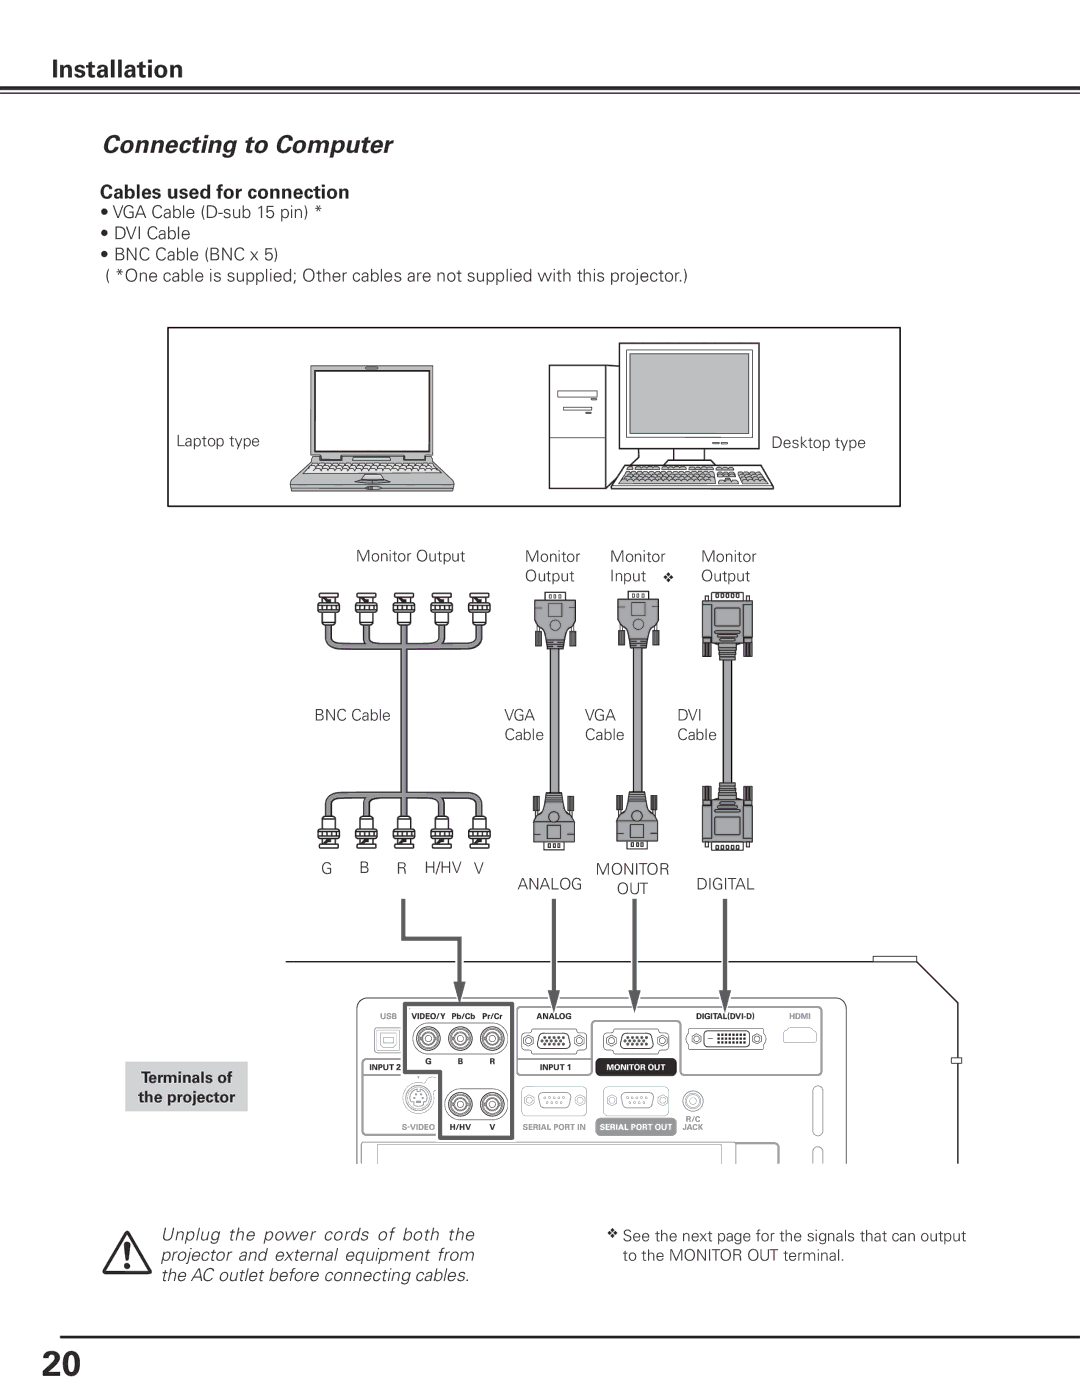 Sanyo PDG-DHT100L owner manual Connecting to Computer, Cables used for connection, Terminals of the projector 